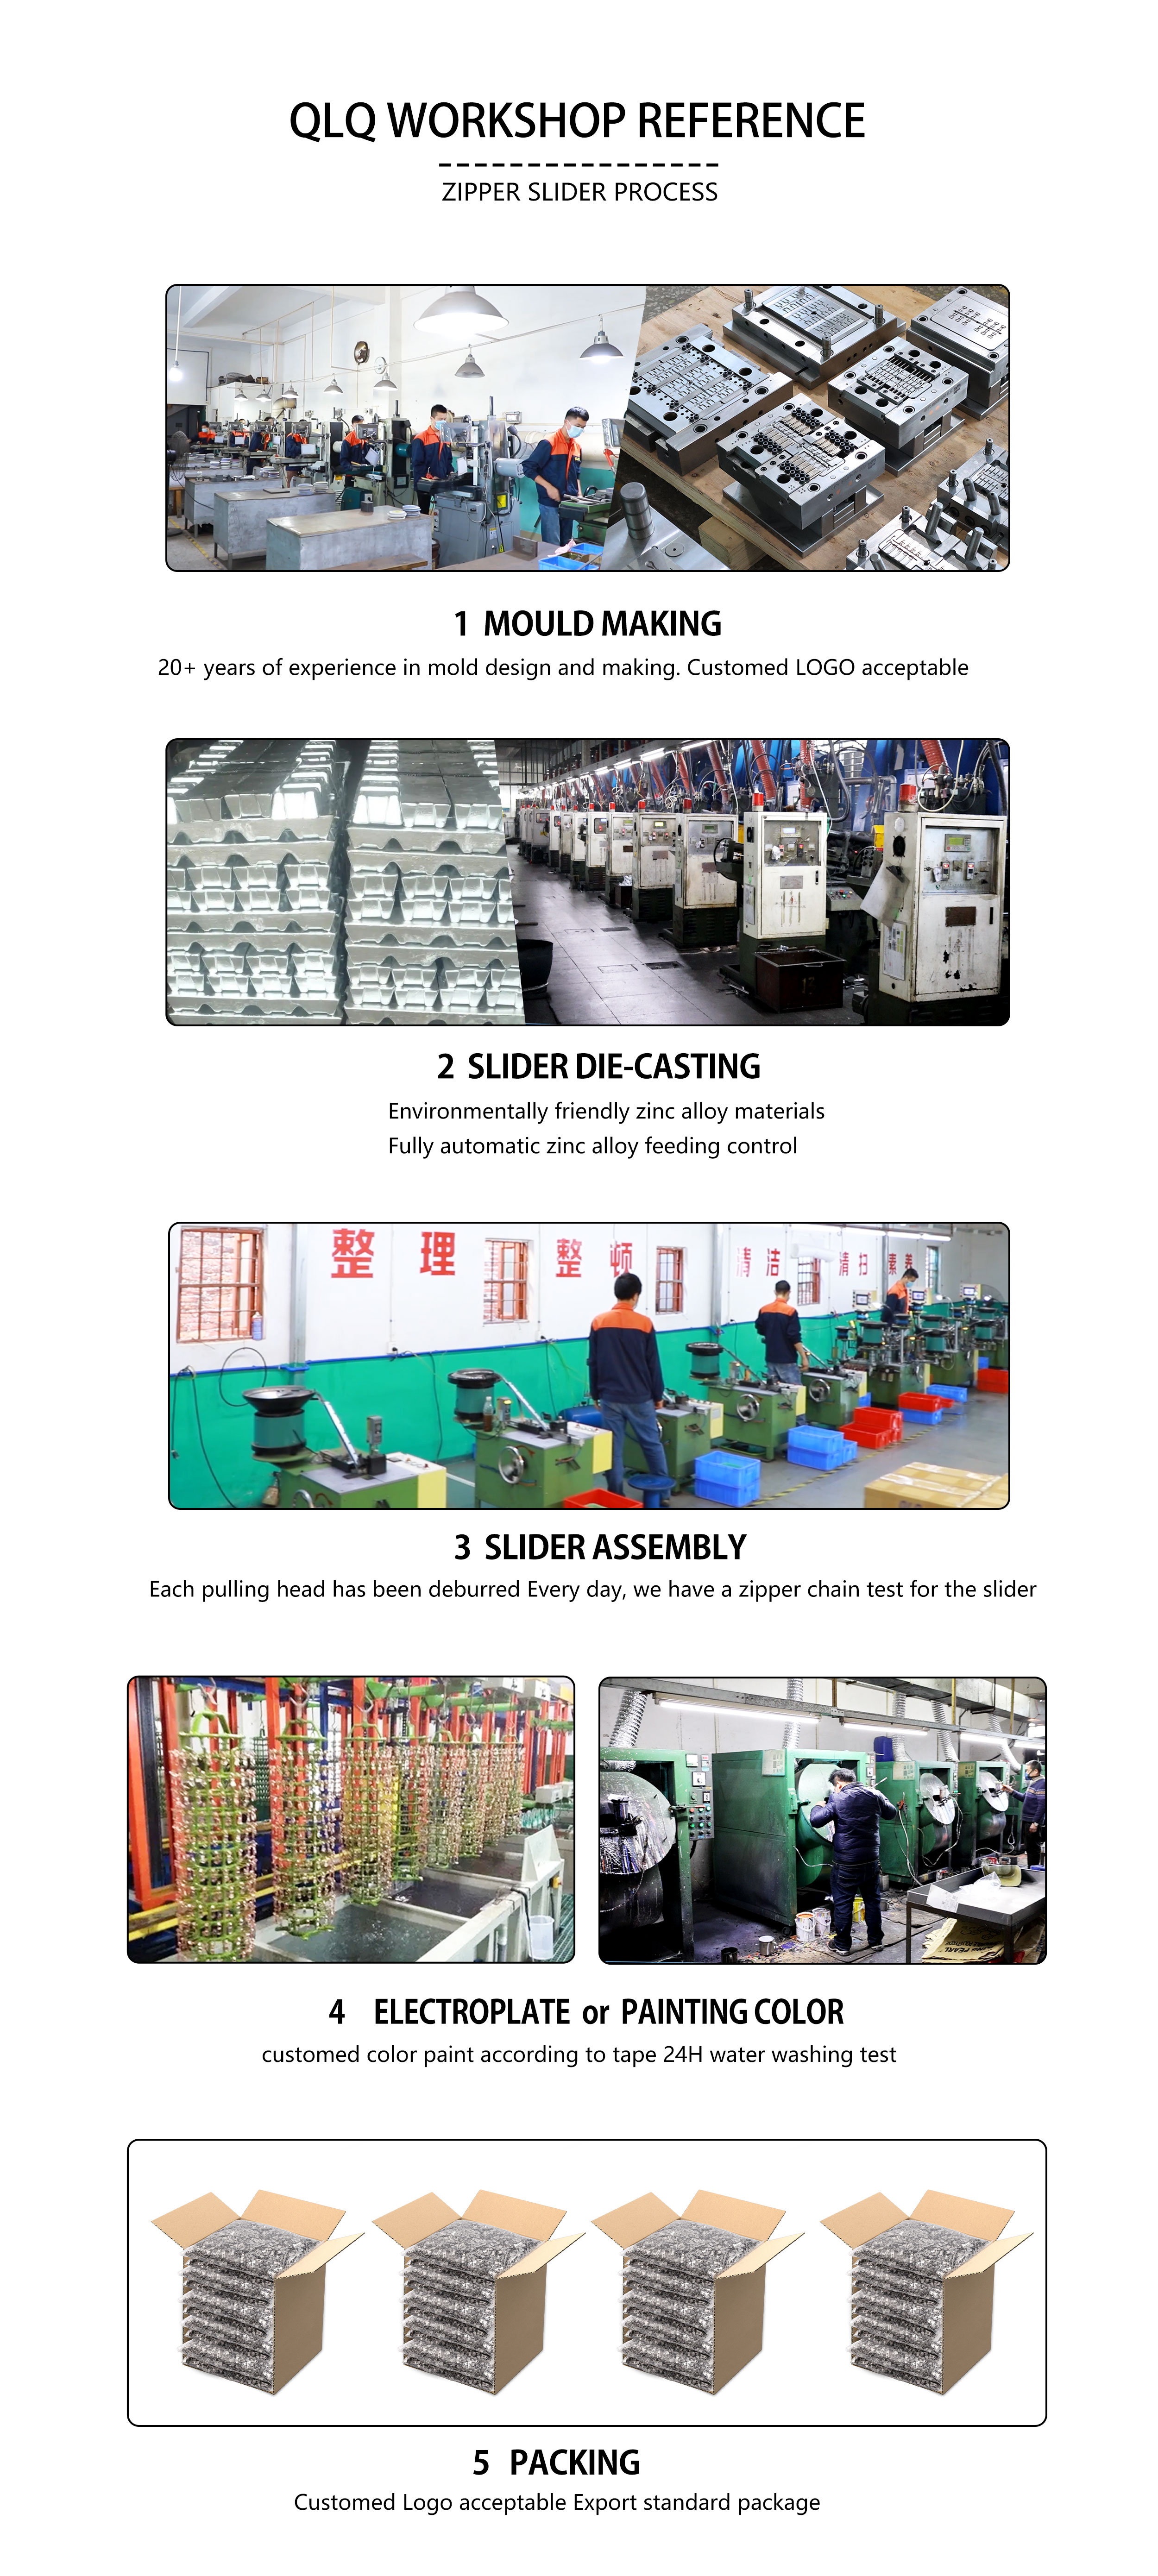 Slider mold production factory